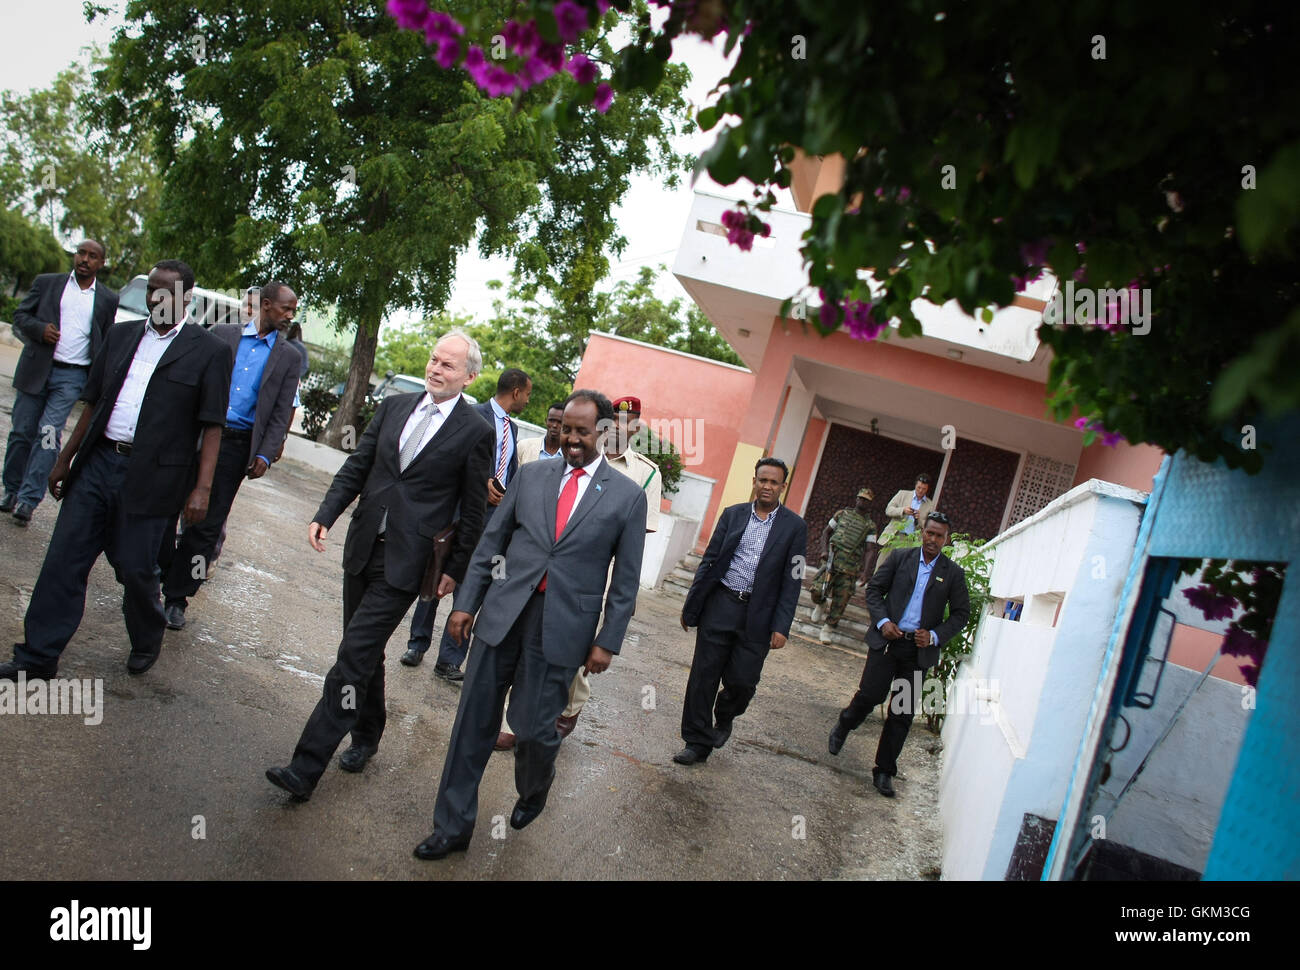 SOMALIA, Mogadishu: In a photograph taken and released by the African Union-United Nations Information Support Team 08 June 2013, Special Representative of the Secretary-General (SRSG) for Somalia, Nicholas Kay, walks with Somali President Hassan Sheikh Mohamud at his presidential offices at Villa Somalia, the complex in central Mogadishu that houses the Federal Government of Somalia. The head of the new United Nations Assistance Mission in Somalia (UNSOM) Kay, today called for an immediate end to fighting in Somalia's southern port city of Kismayo, urging all parties to commit to resolve diff Stock Photo